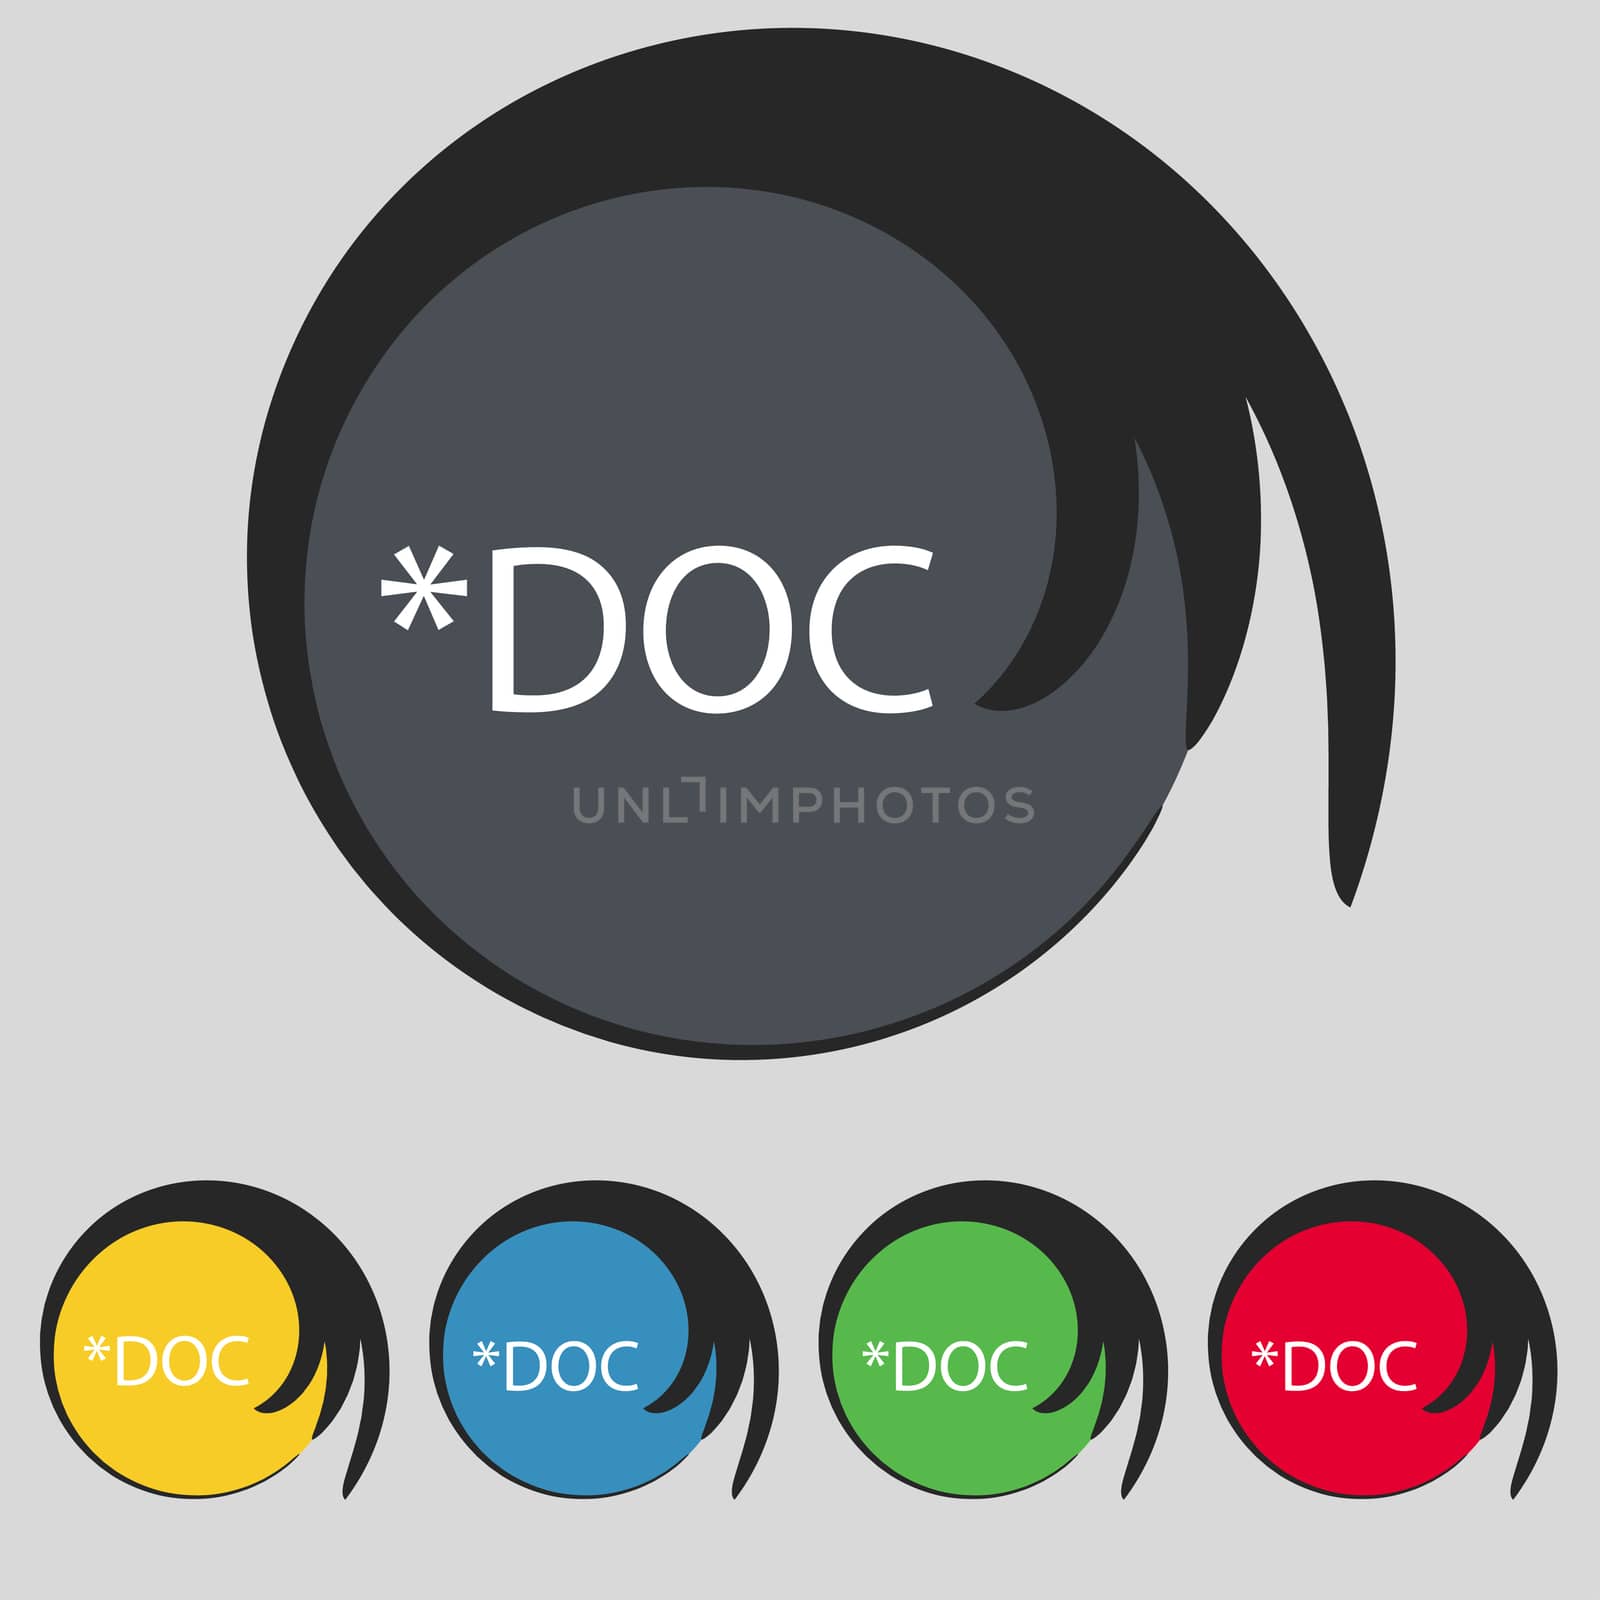 File document icon. Download doc button. Doc file extension symbol. Set of colored buttons.  by serhii_lohvyniuk